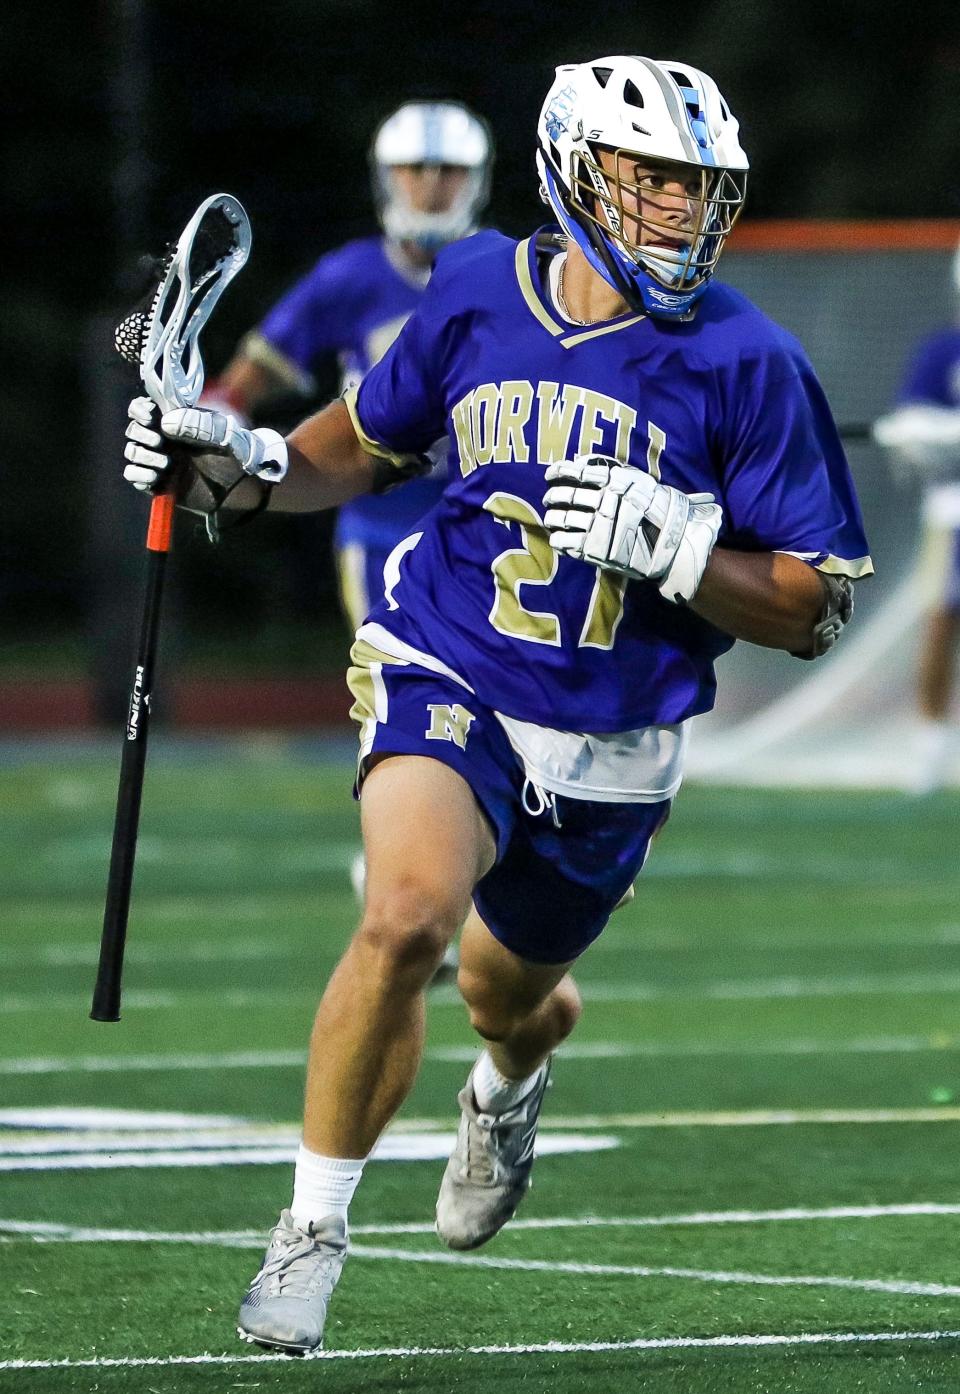 Norwell's John Mullen carries the ball during the Division 3 state title game against Medfield on the campus of Worcester State University on Wednesday, June 22, 2022.